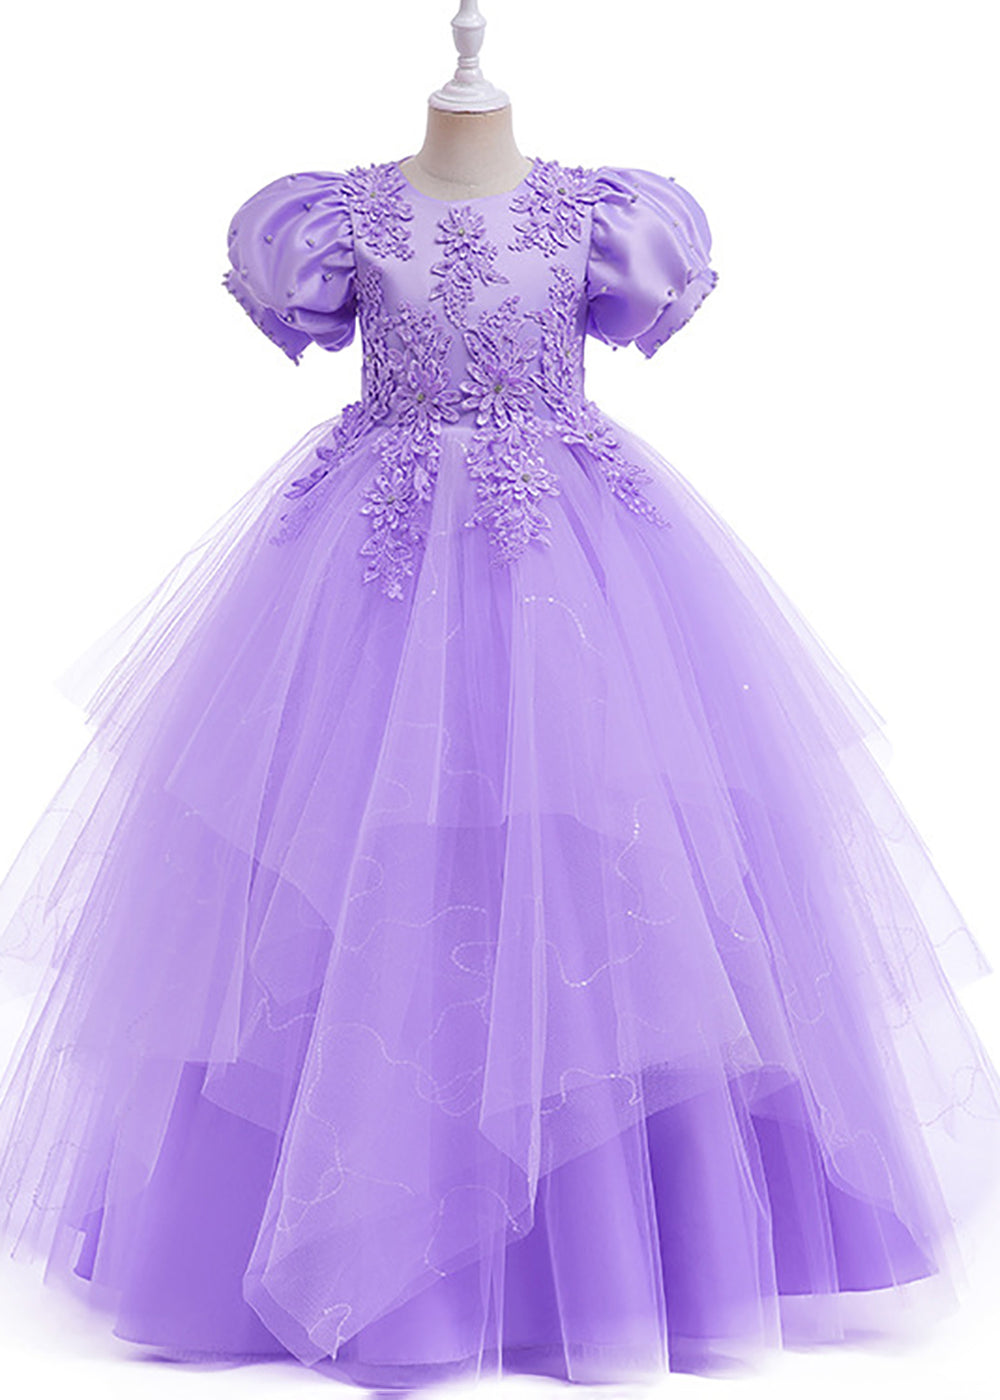 Puff Sleeves Round Neck Appliques Tulle A-line Flower Girl Dress